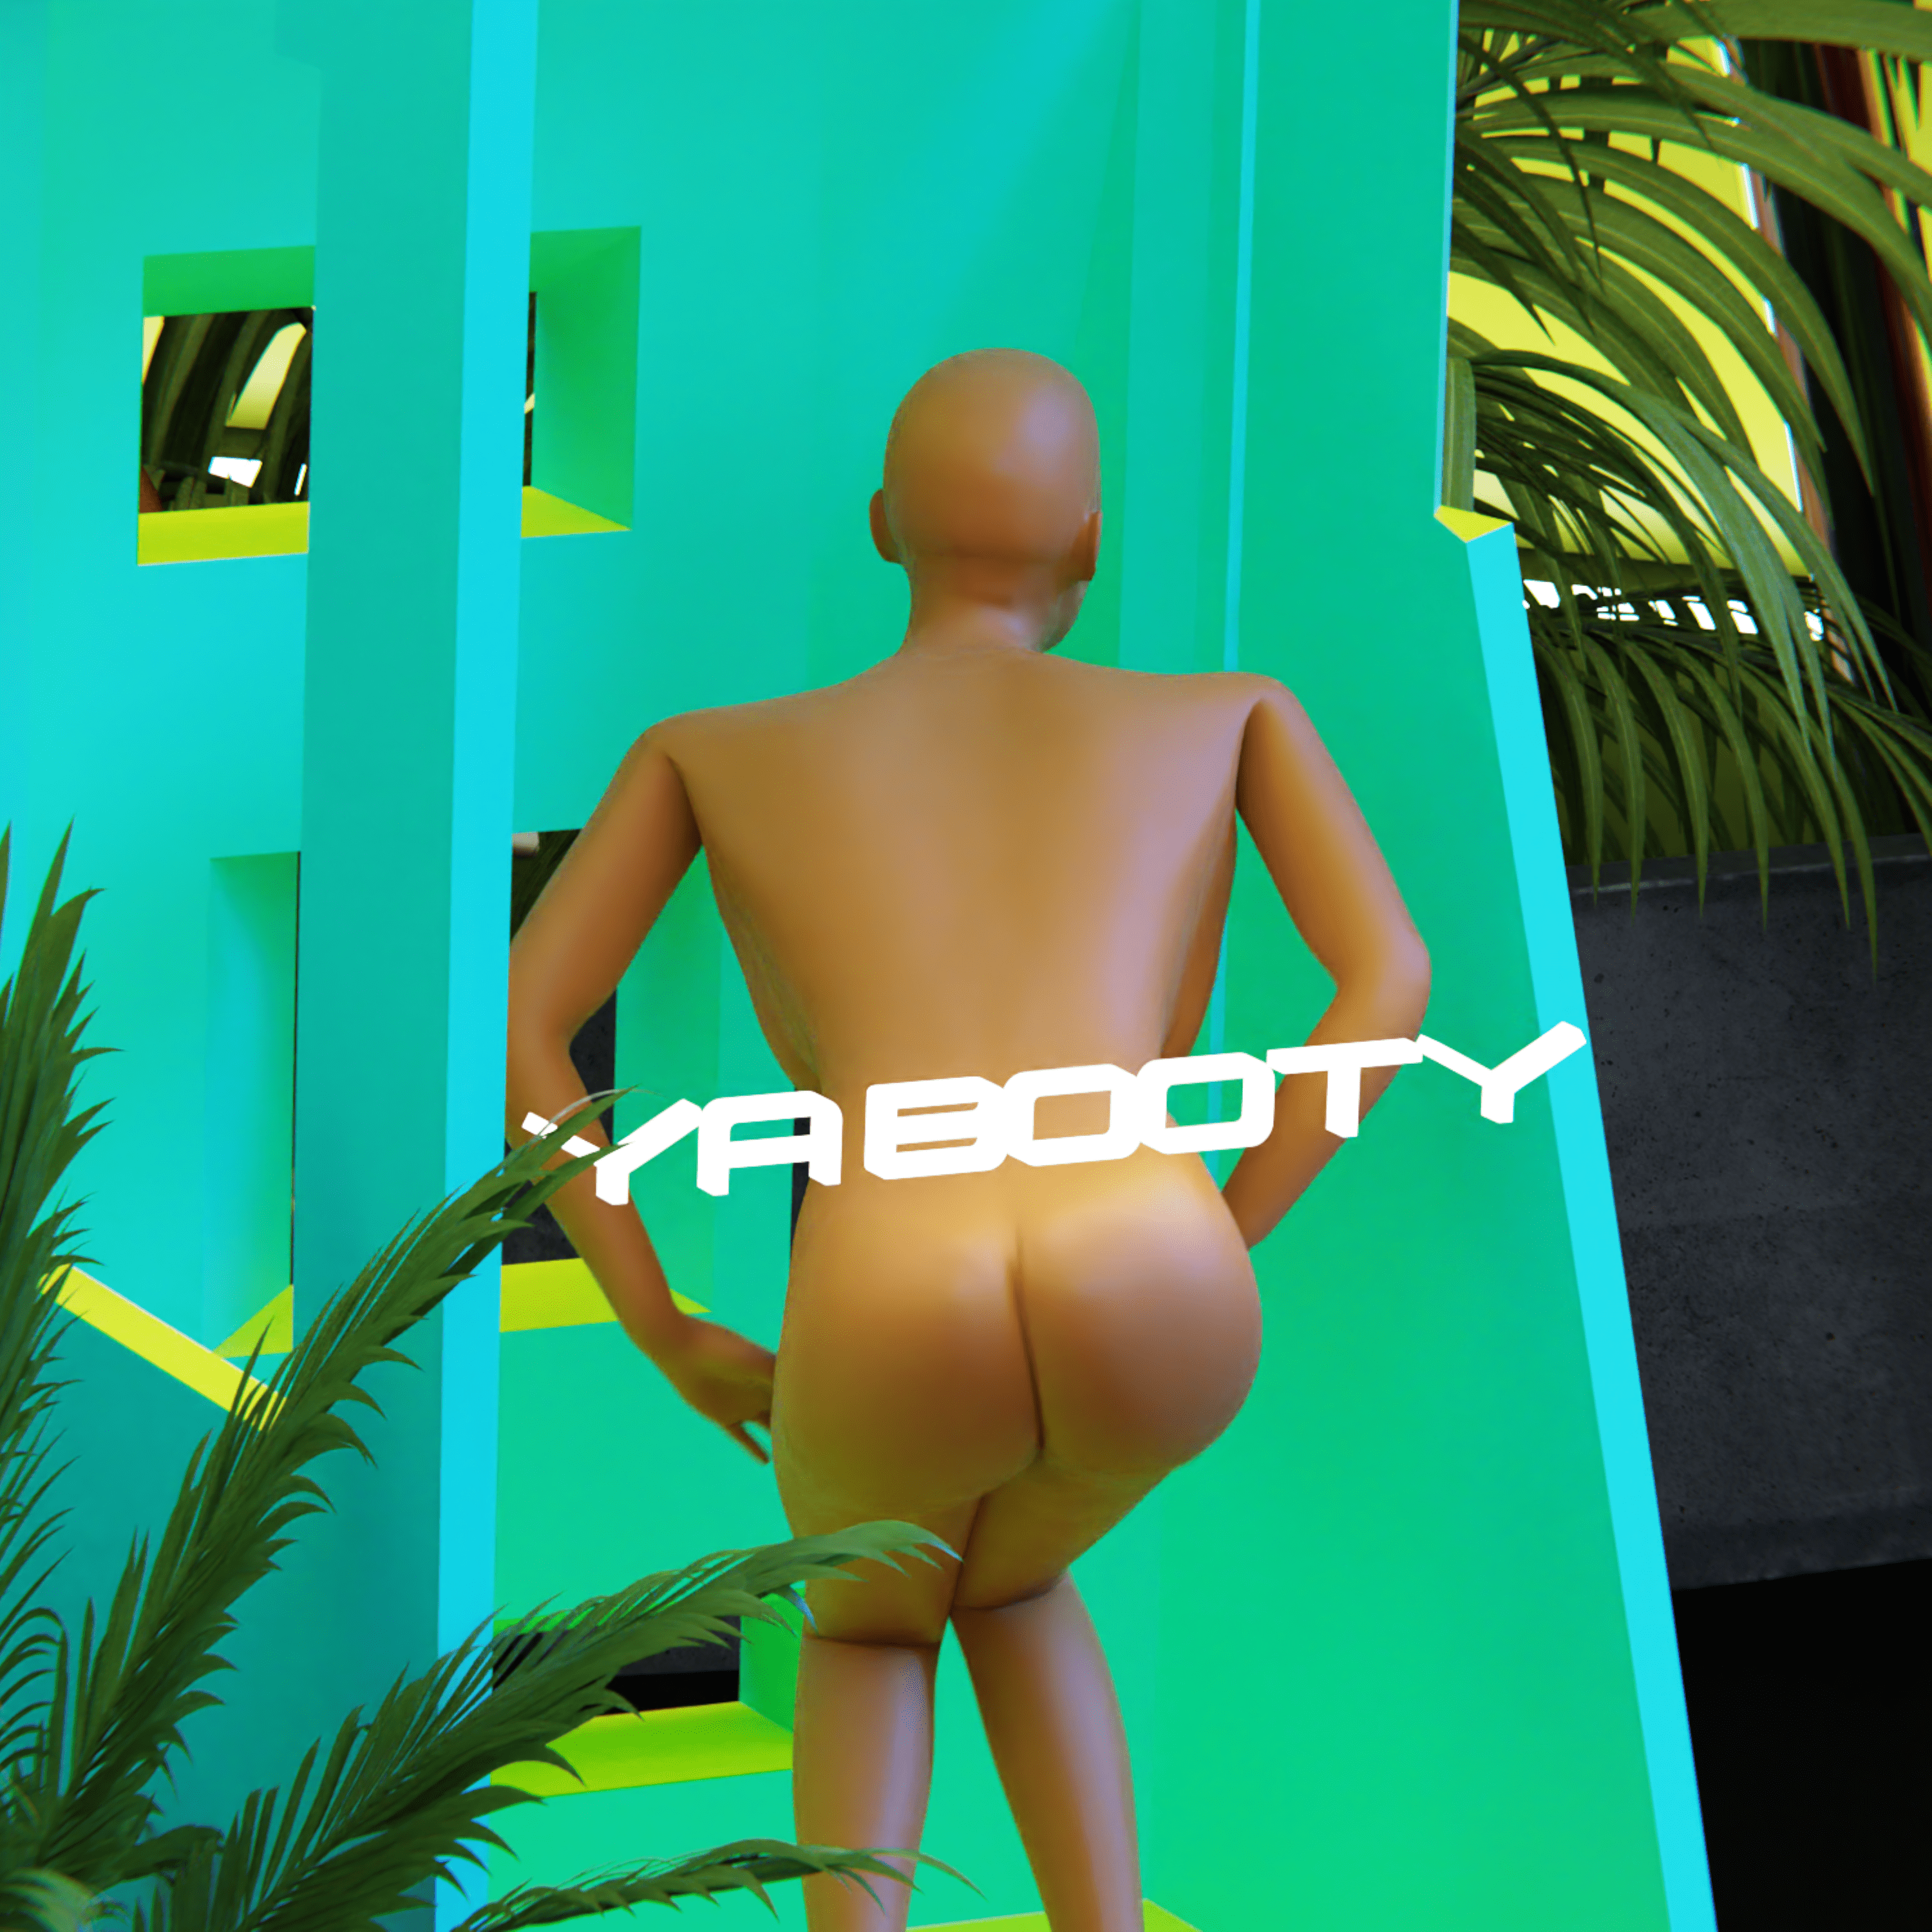 Cover art for Dabow's song: Ya Booty